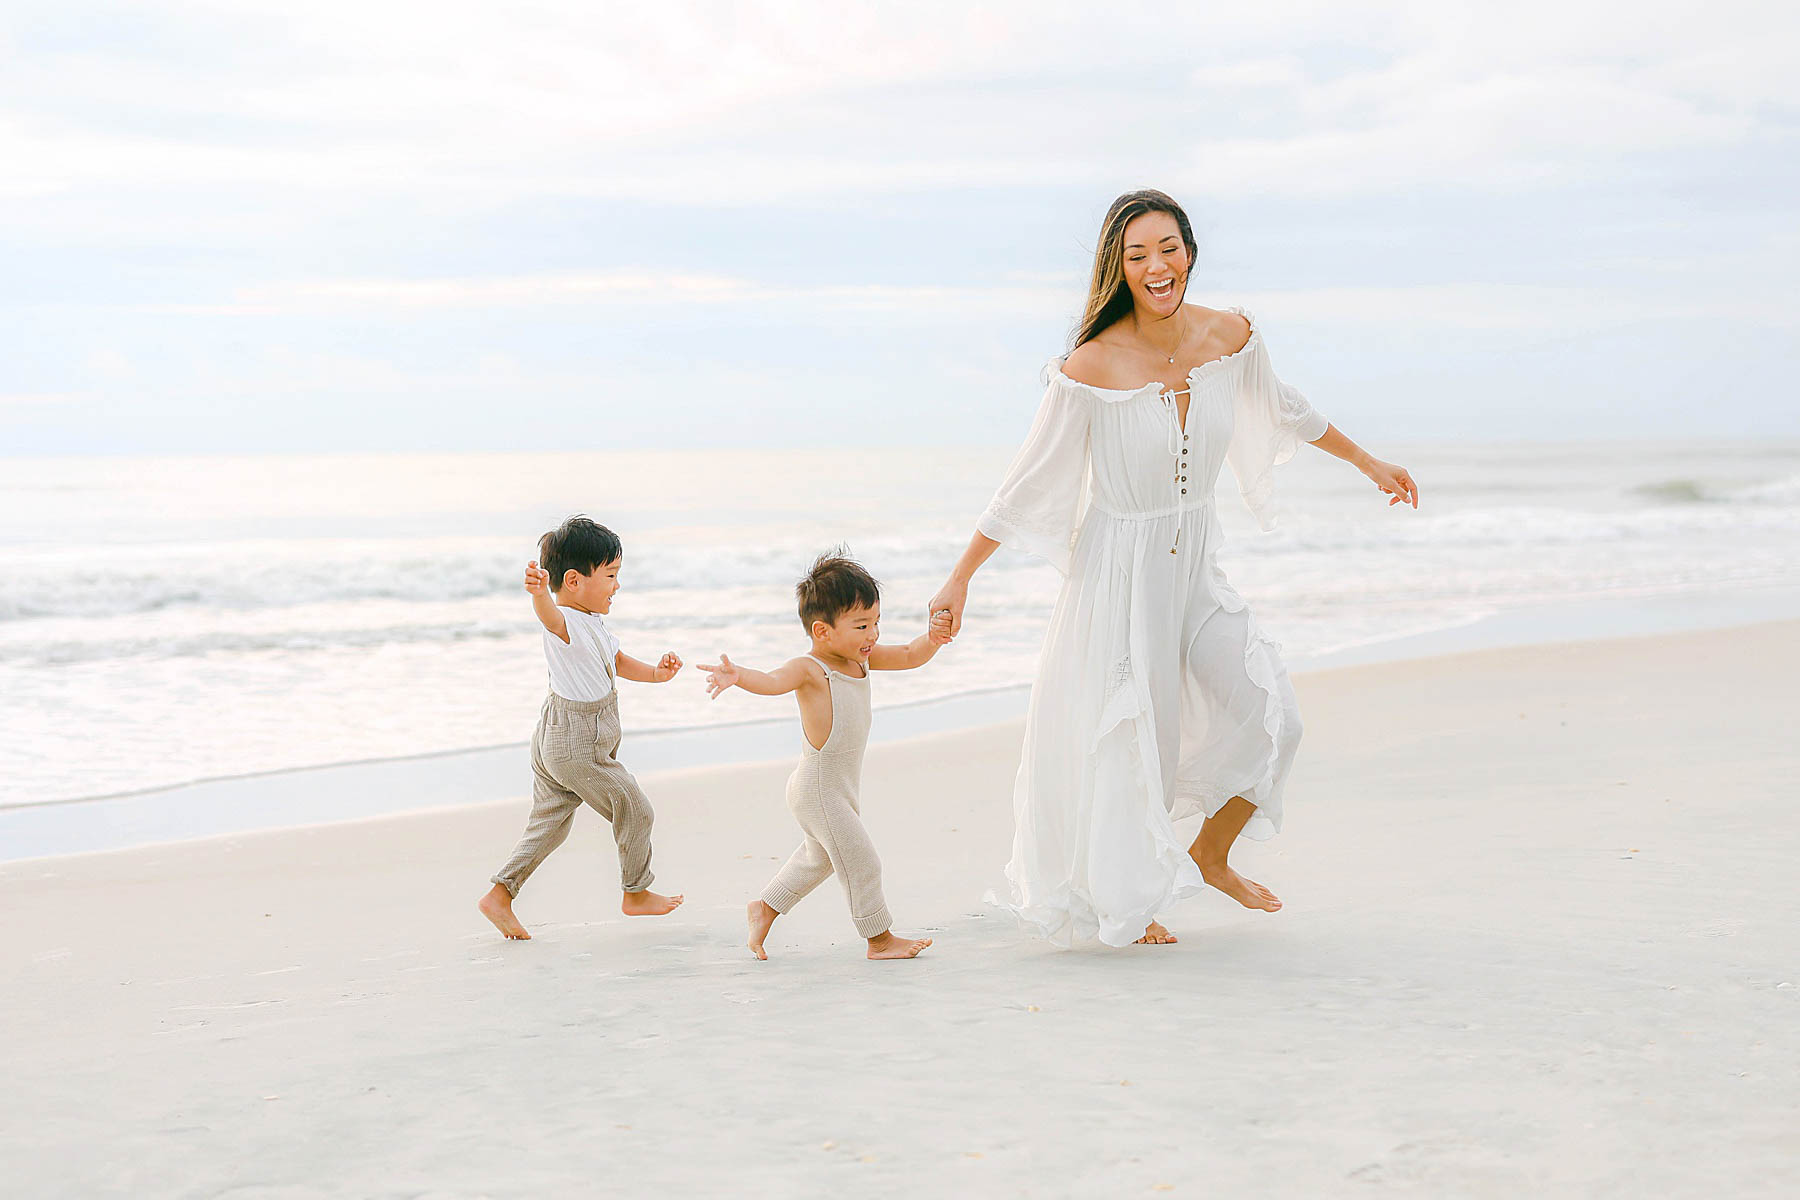 woman running on the beach in a white dress playing with two baby boys